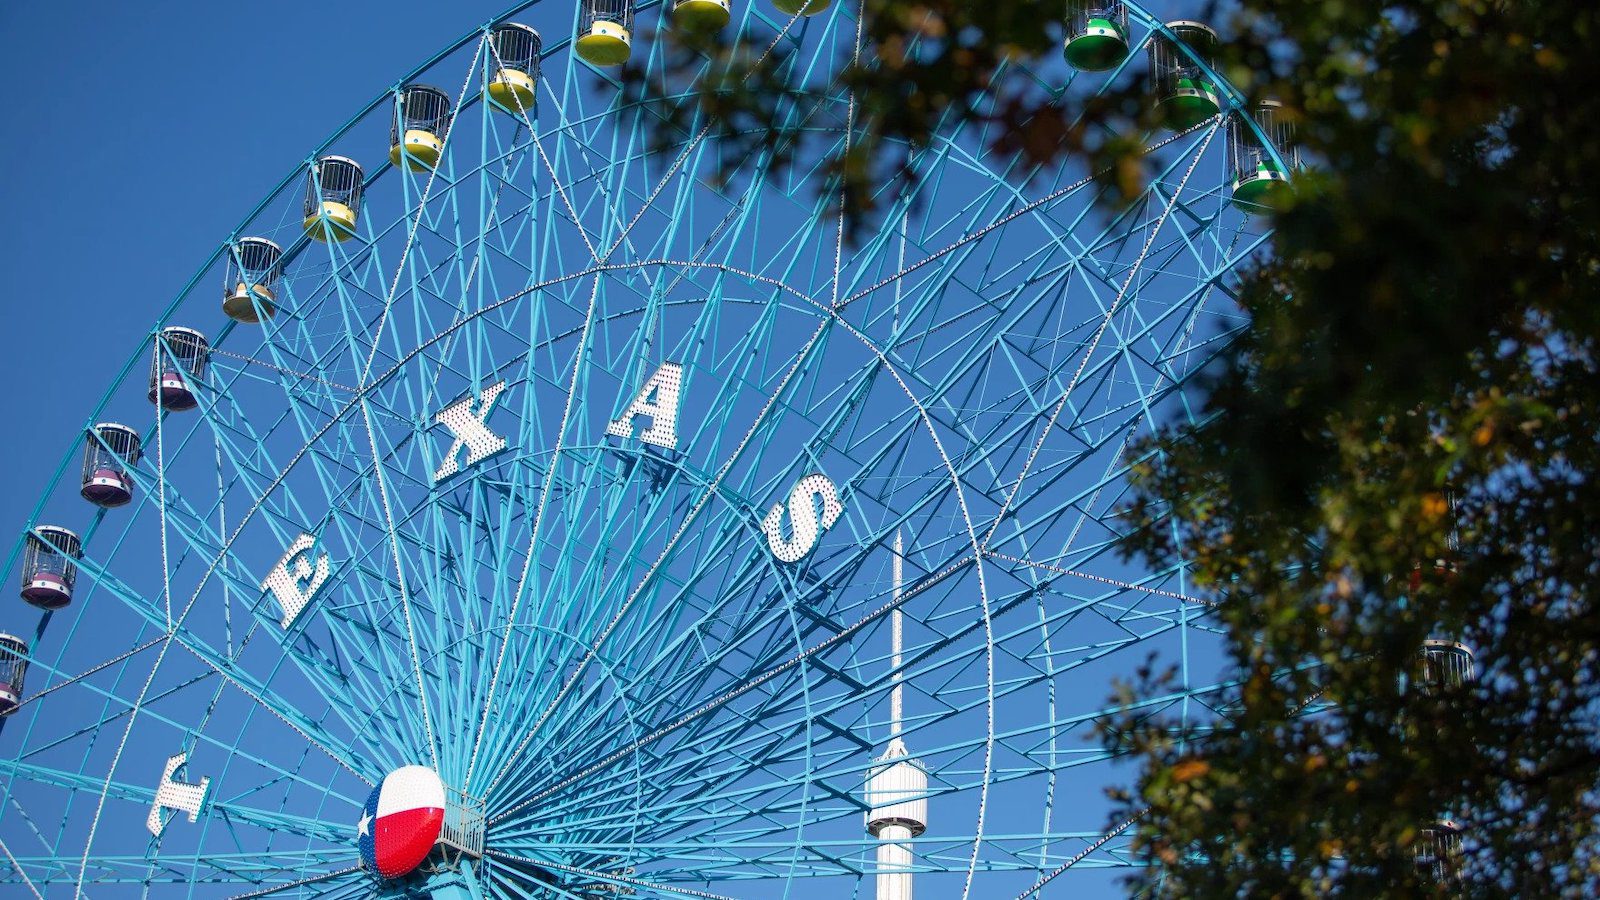 New Weather Alert System at Texas State Fair